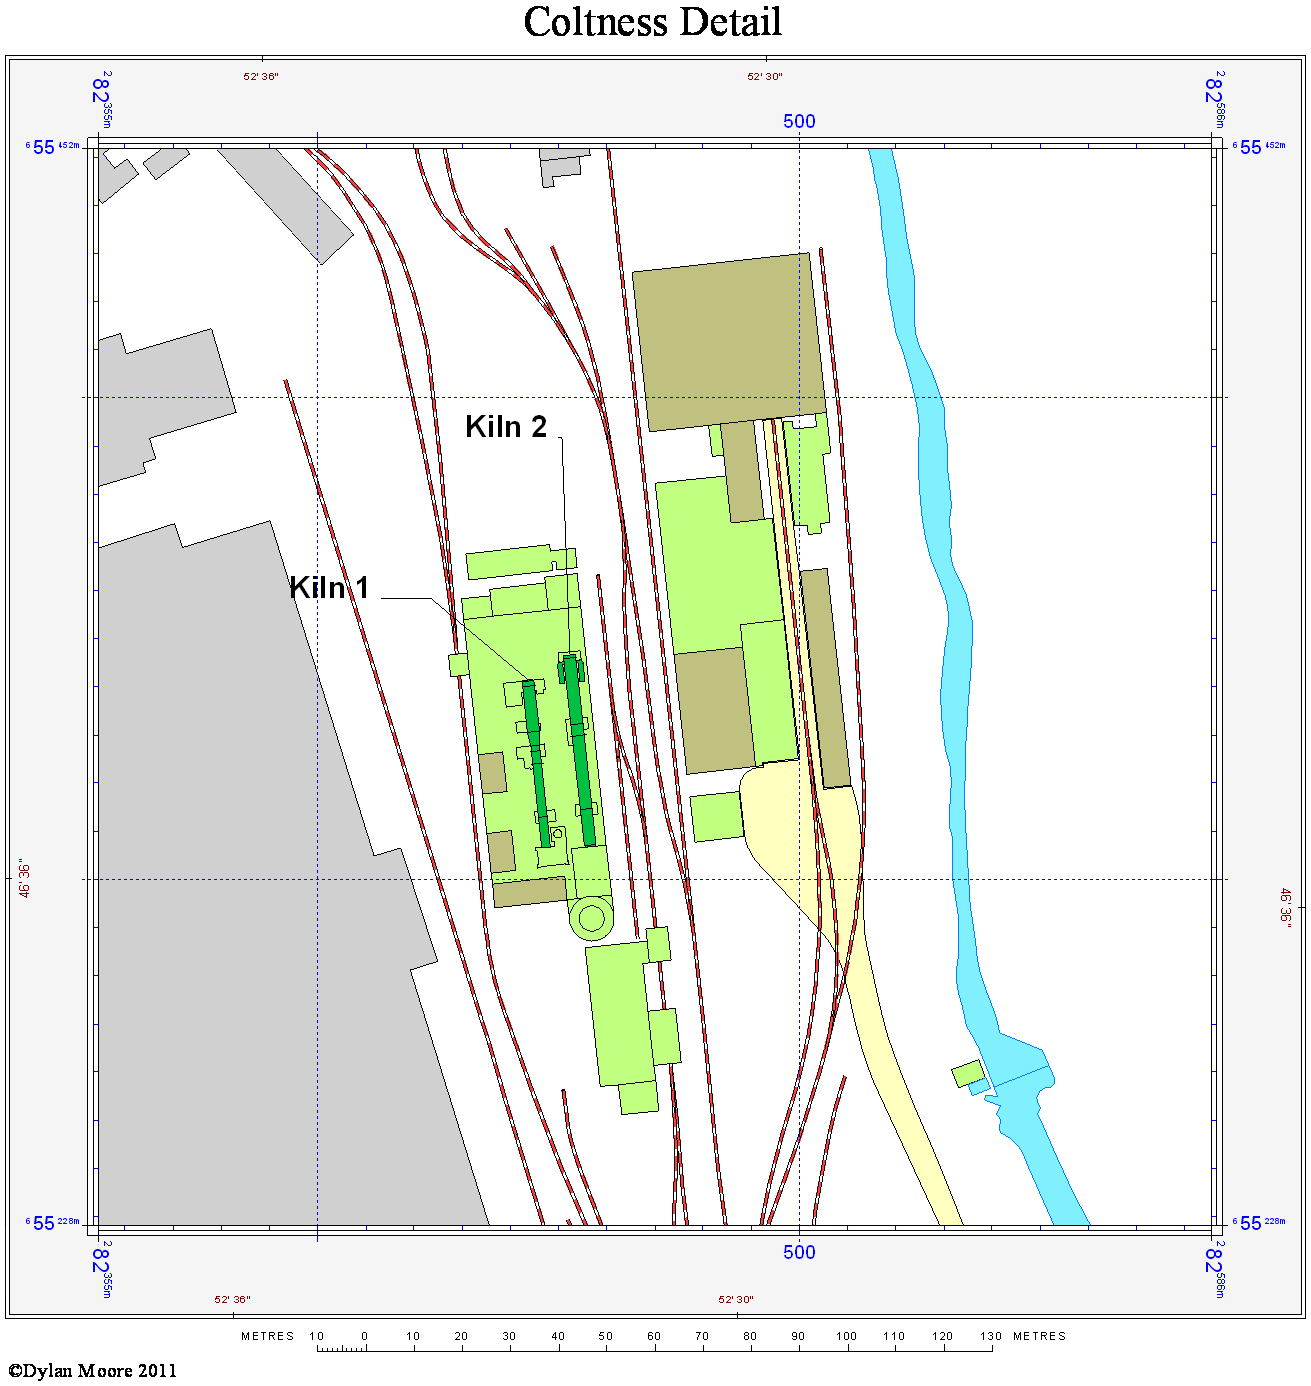 Coltness cement plant layout map